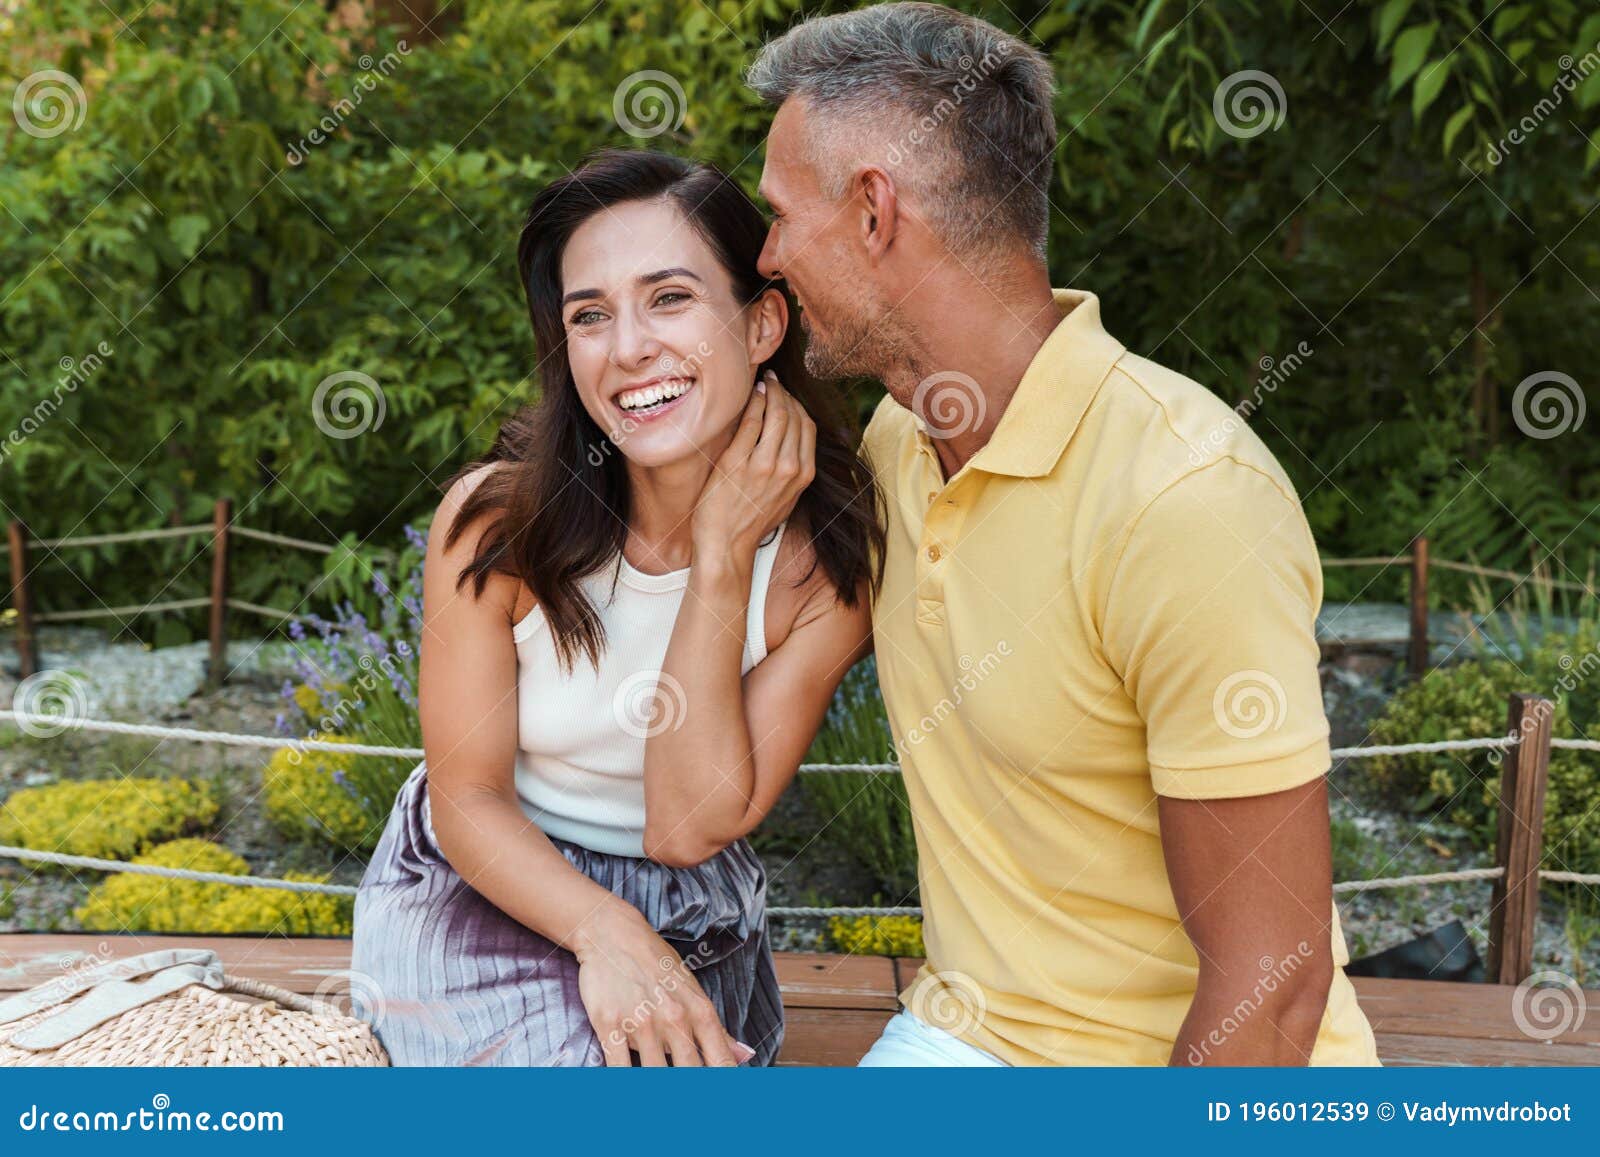 Portrait Of Laughing Middle Aged Couple Hugging While Sitting On Bench In Summer Park Stock